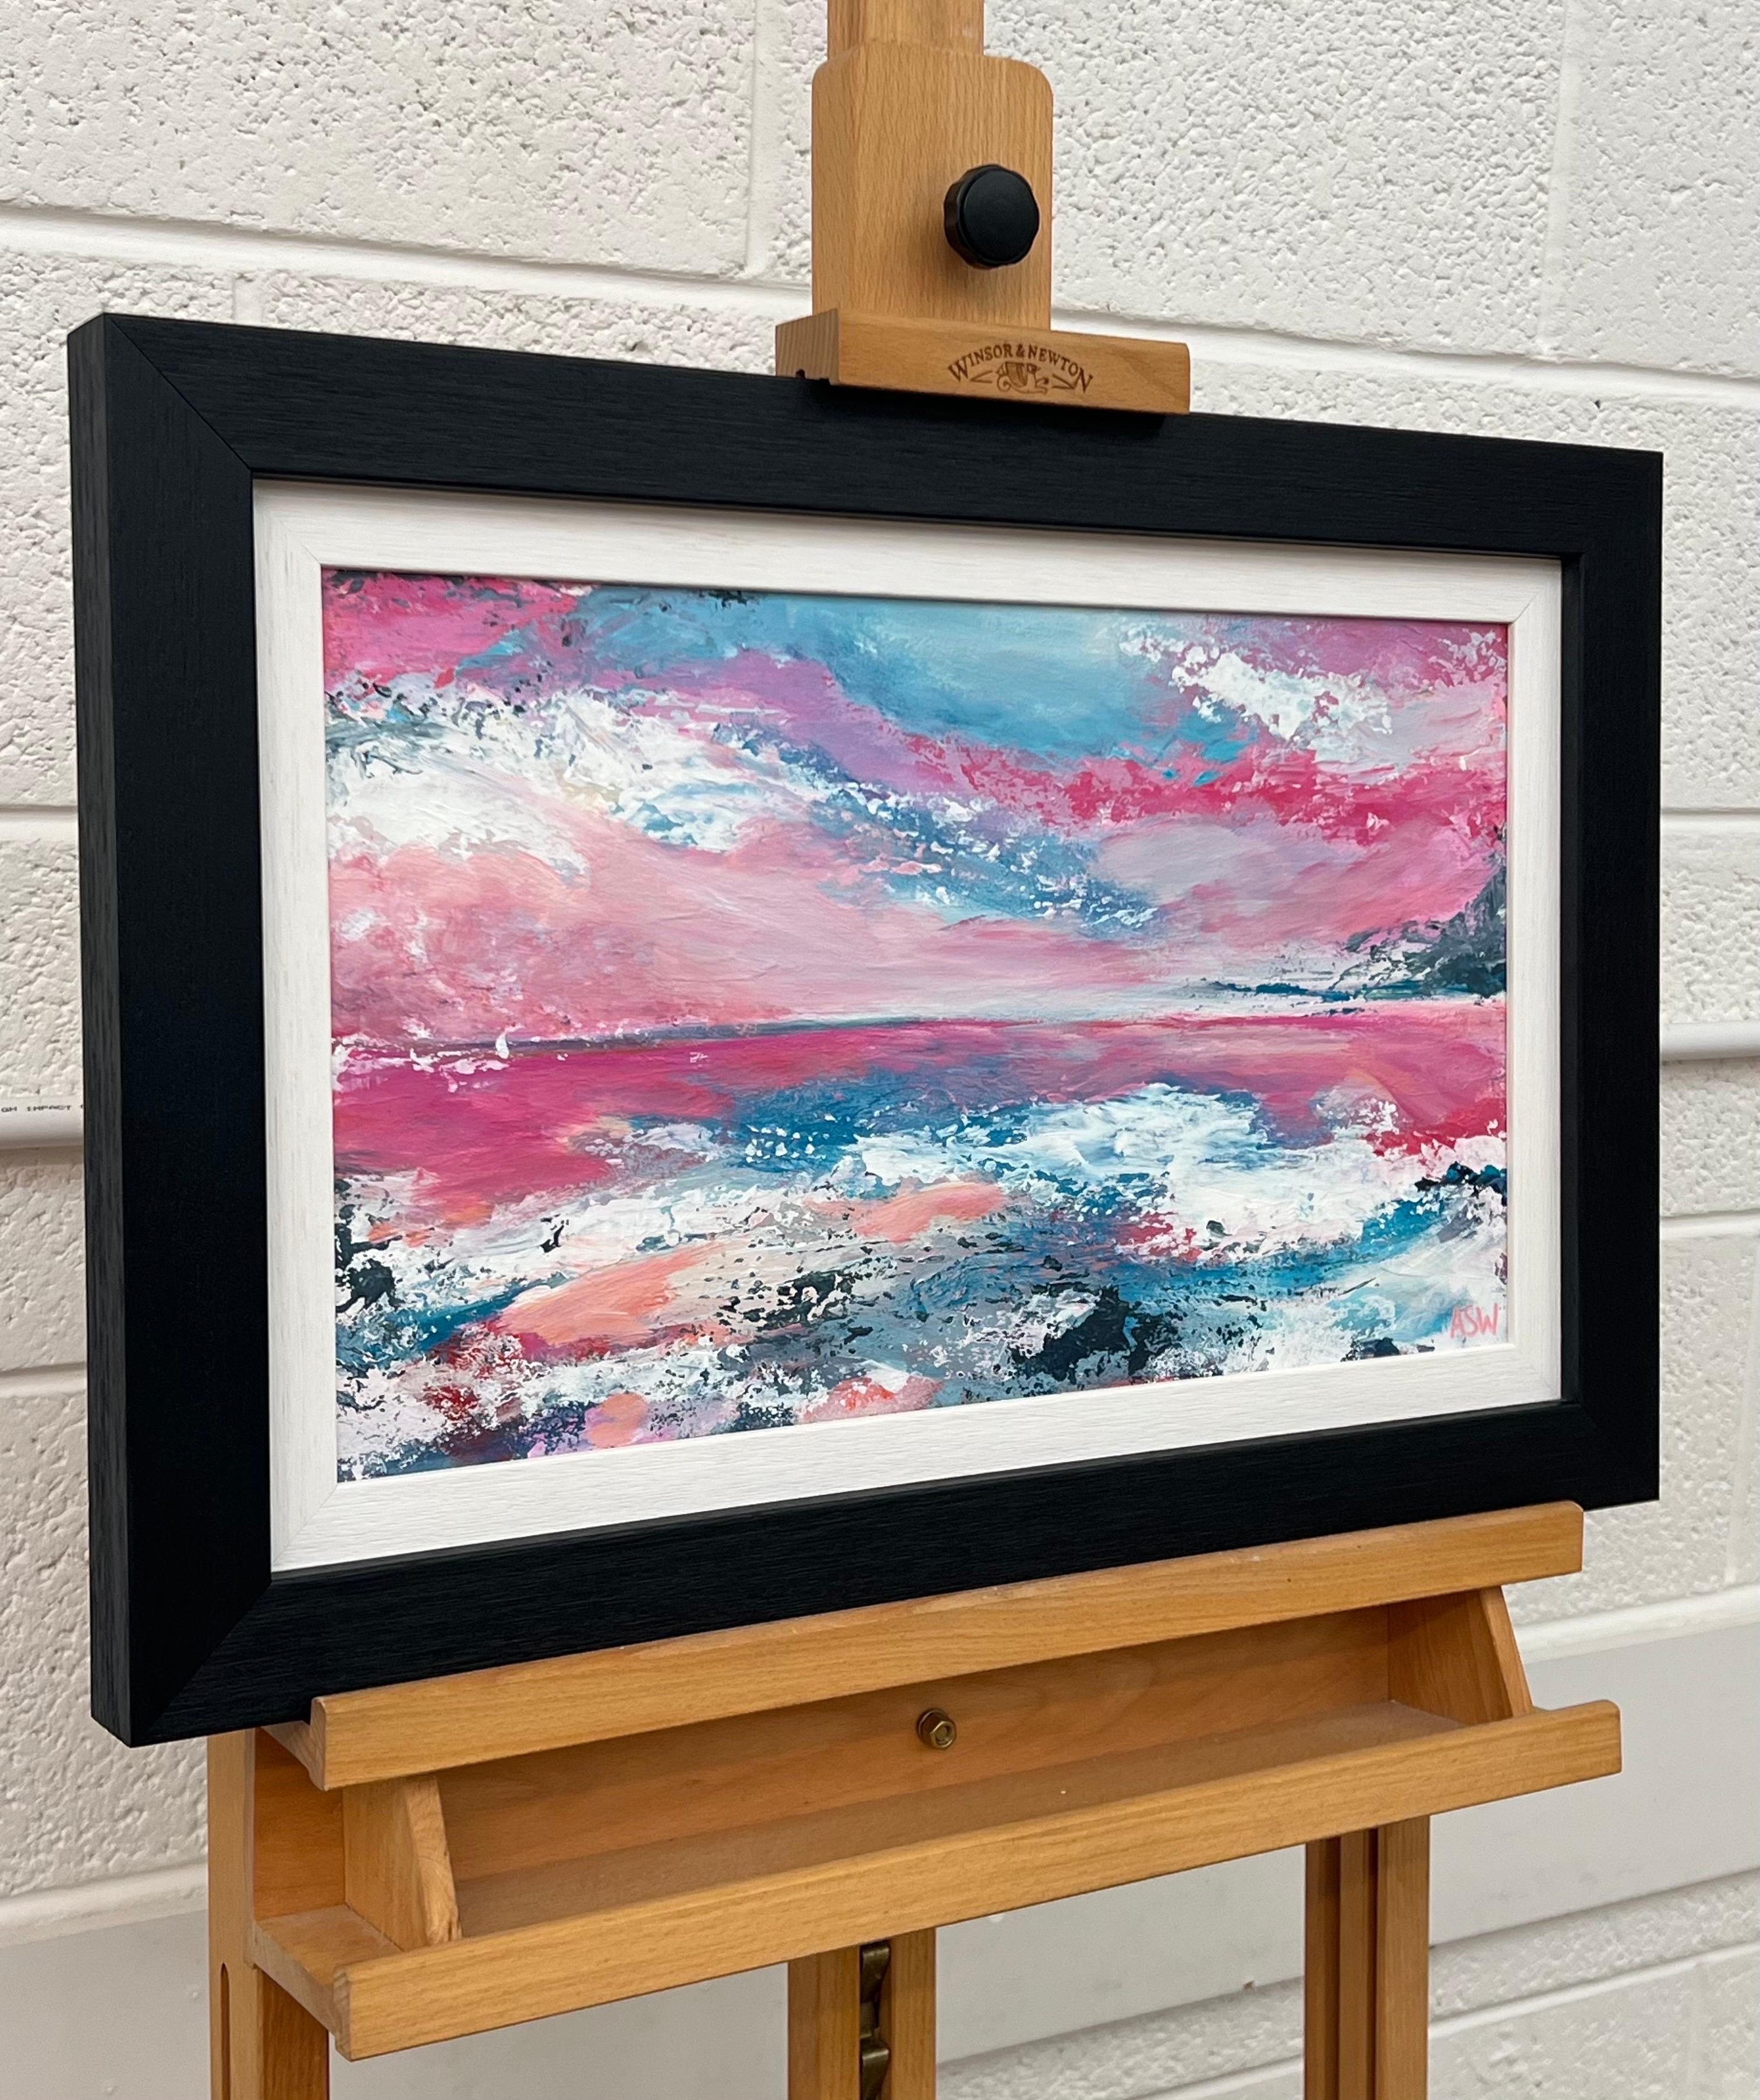 Abstract Landscape Seascape Painting with Pink & Blue Sky by Leading British Painter, Angela Wakefield

Art measures 18 x 12 inches
Frame measures 22 x 16 inches

This painting features an abstract seascape rendered in vibrant shades of pink, blue,